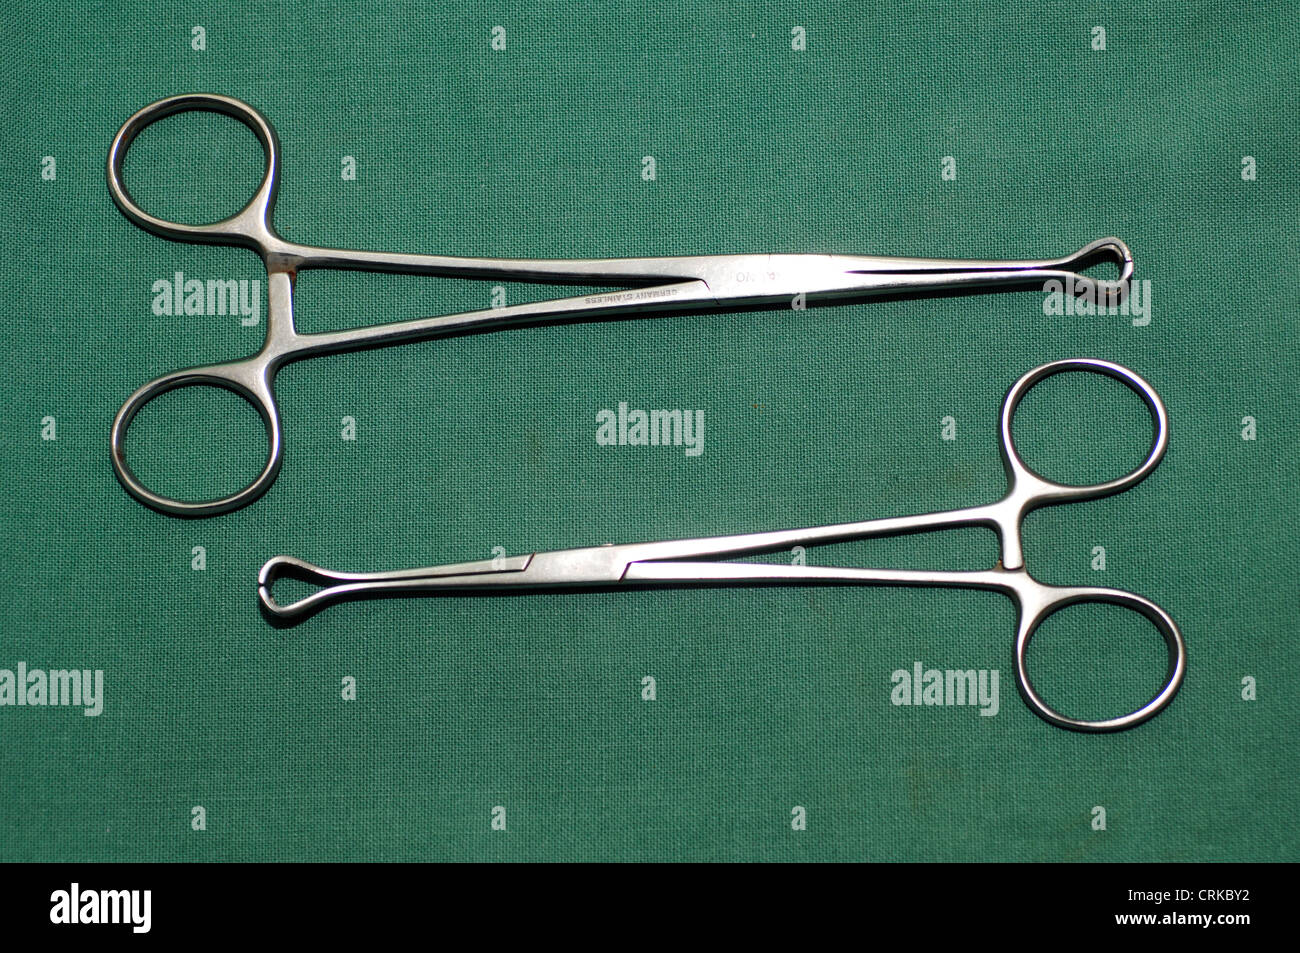 Babcock forceps are designed to hold a short length of intestine without compressing it. Stock Photo